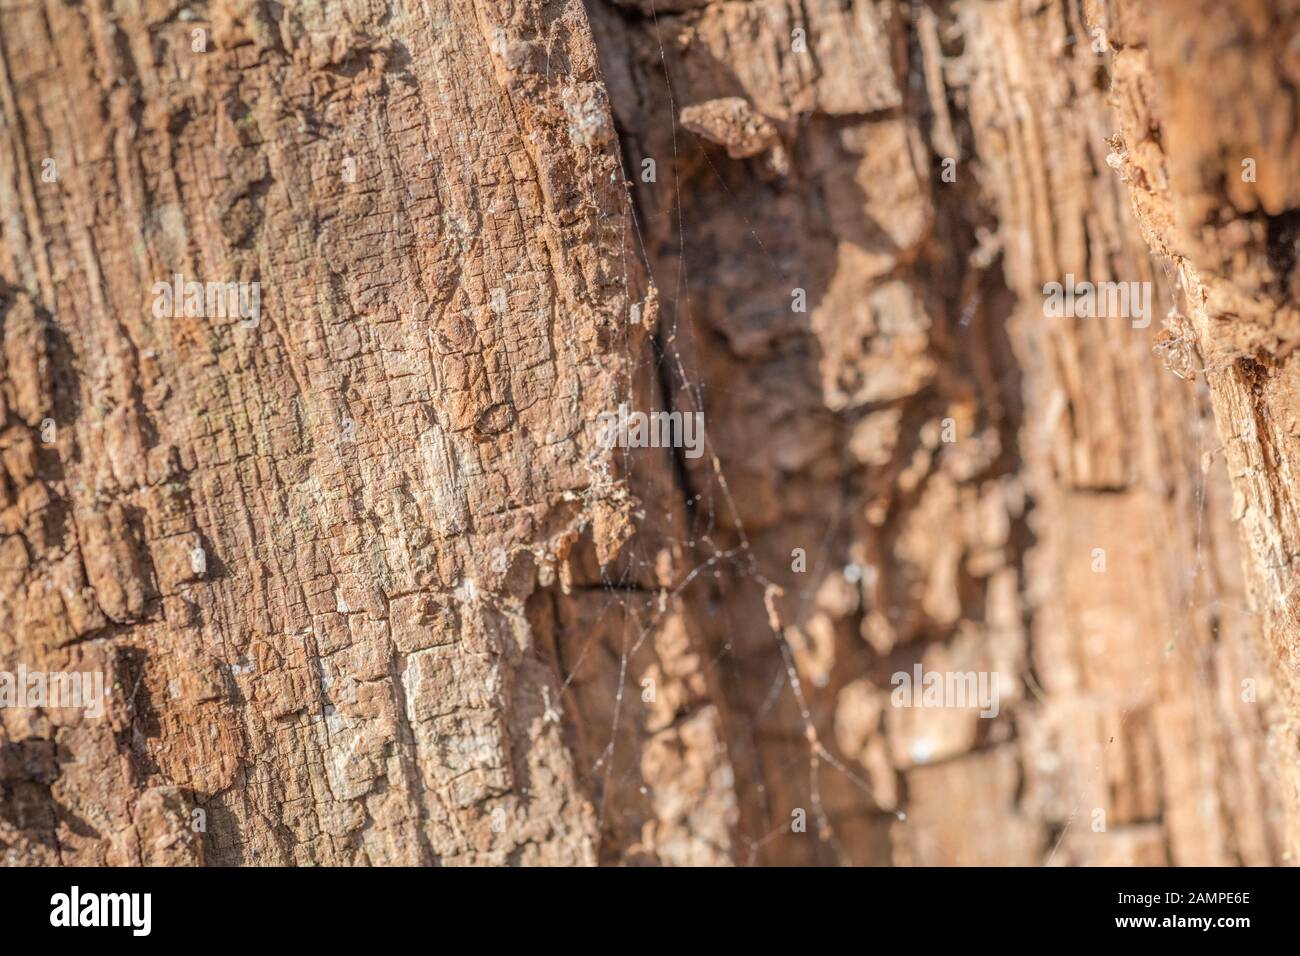 Close up shot of powdery rotting wood (sometimes called punkwood) of a fallen tree trunk. Side-lit by springtime sunshine. Stock Photo